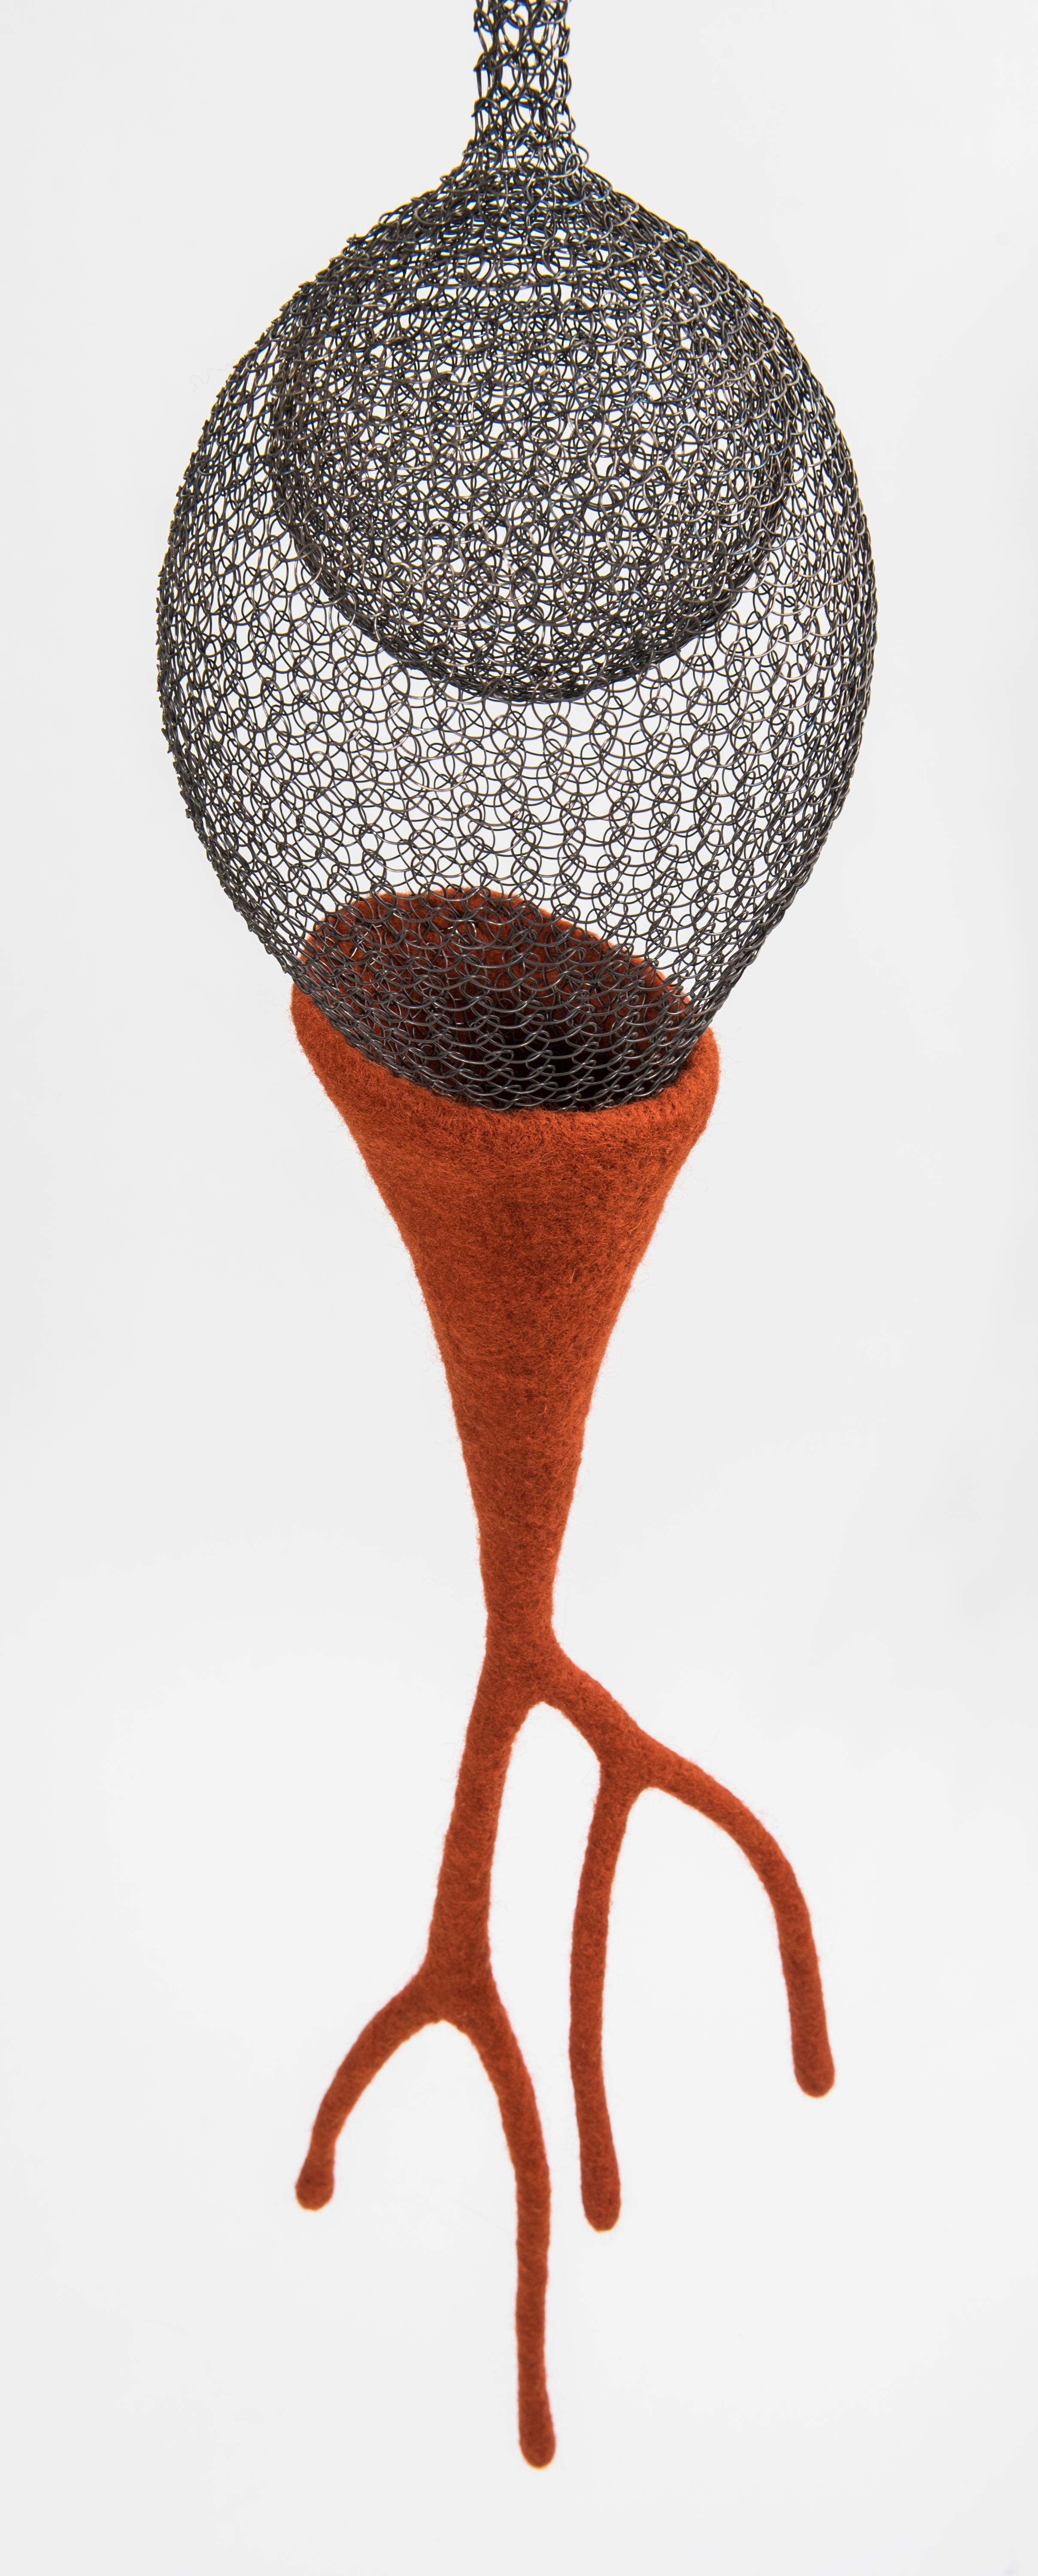 Elegance for its forms, sobriety for its materials, this sensual sculpture named « Being» is a meshwork combining with felted dark ginger wool, created and entirely handmade from annealed iron wire and felting wool by artist Delphine Grandvaux.  The